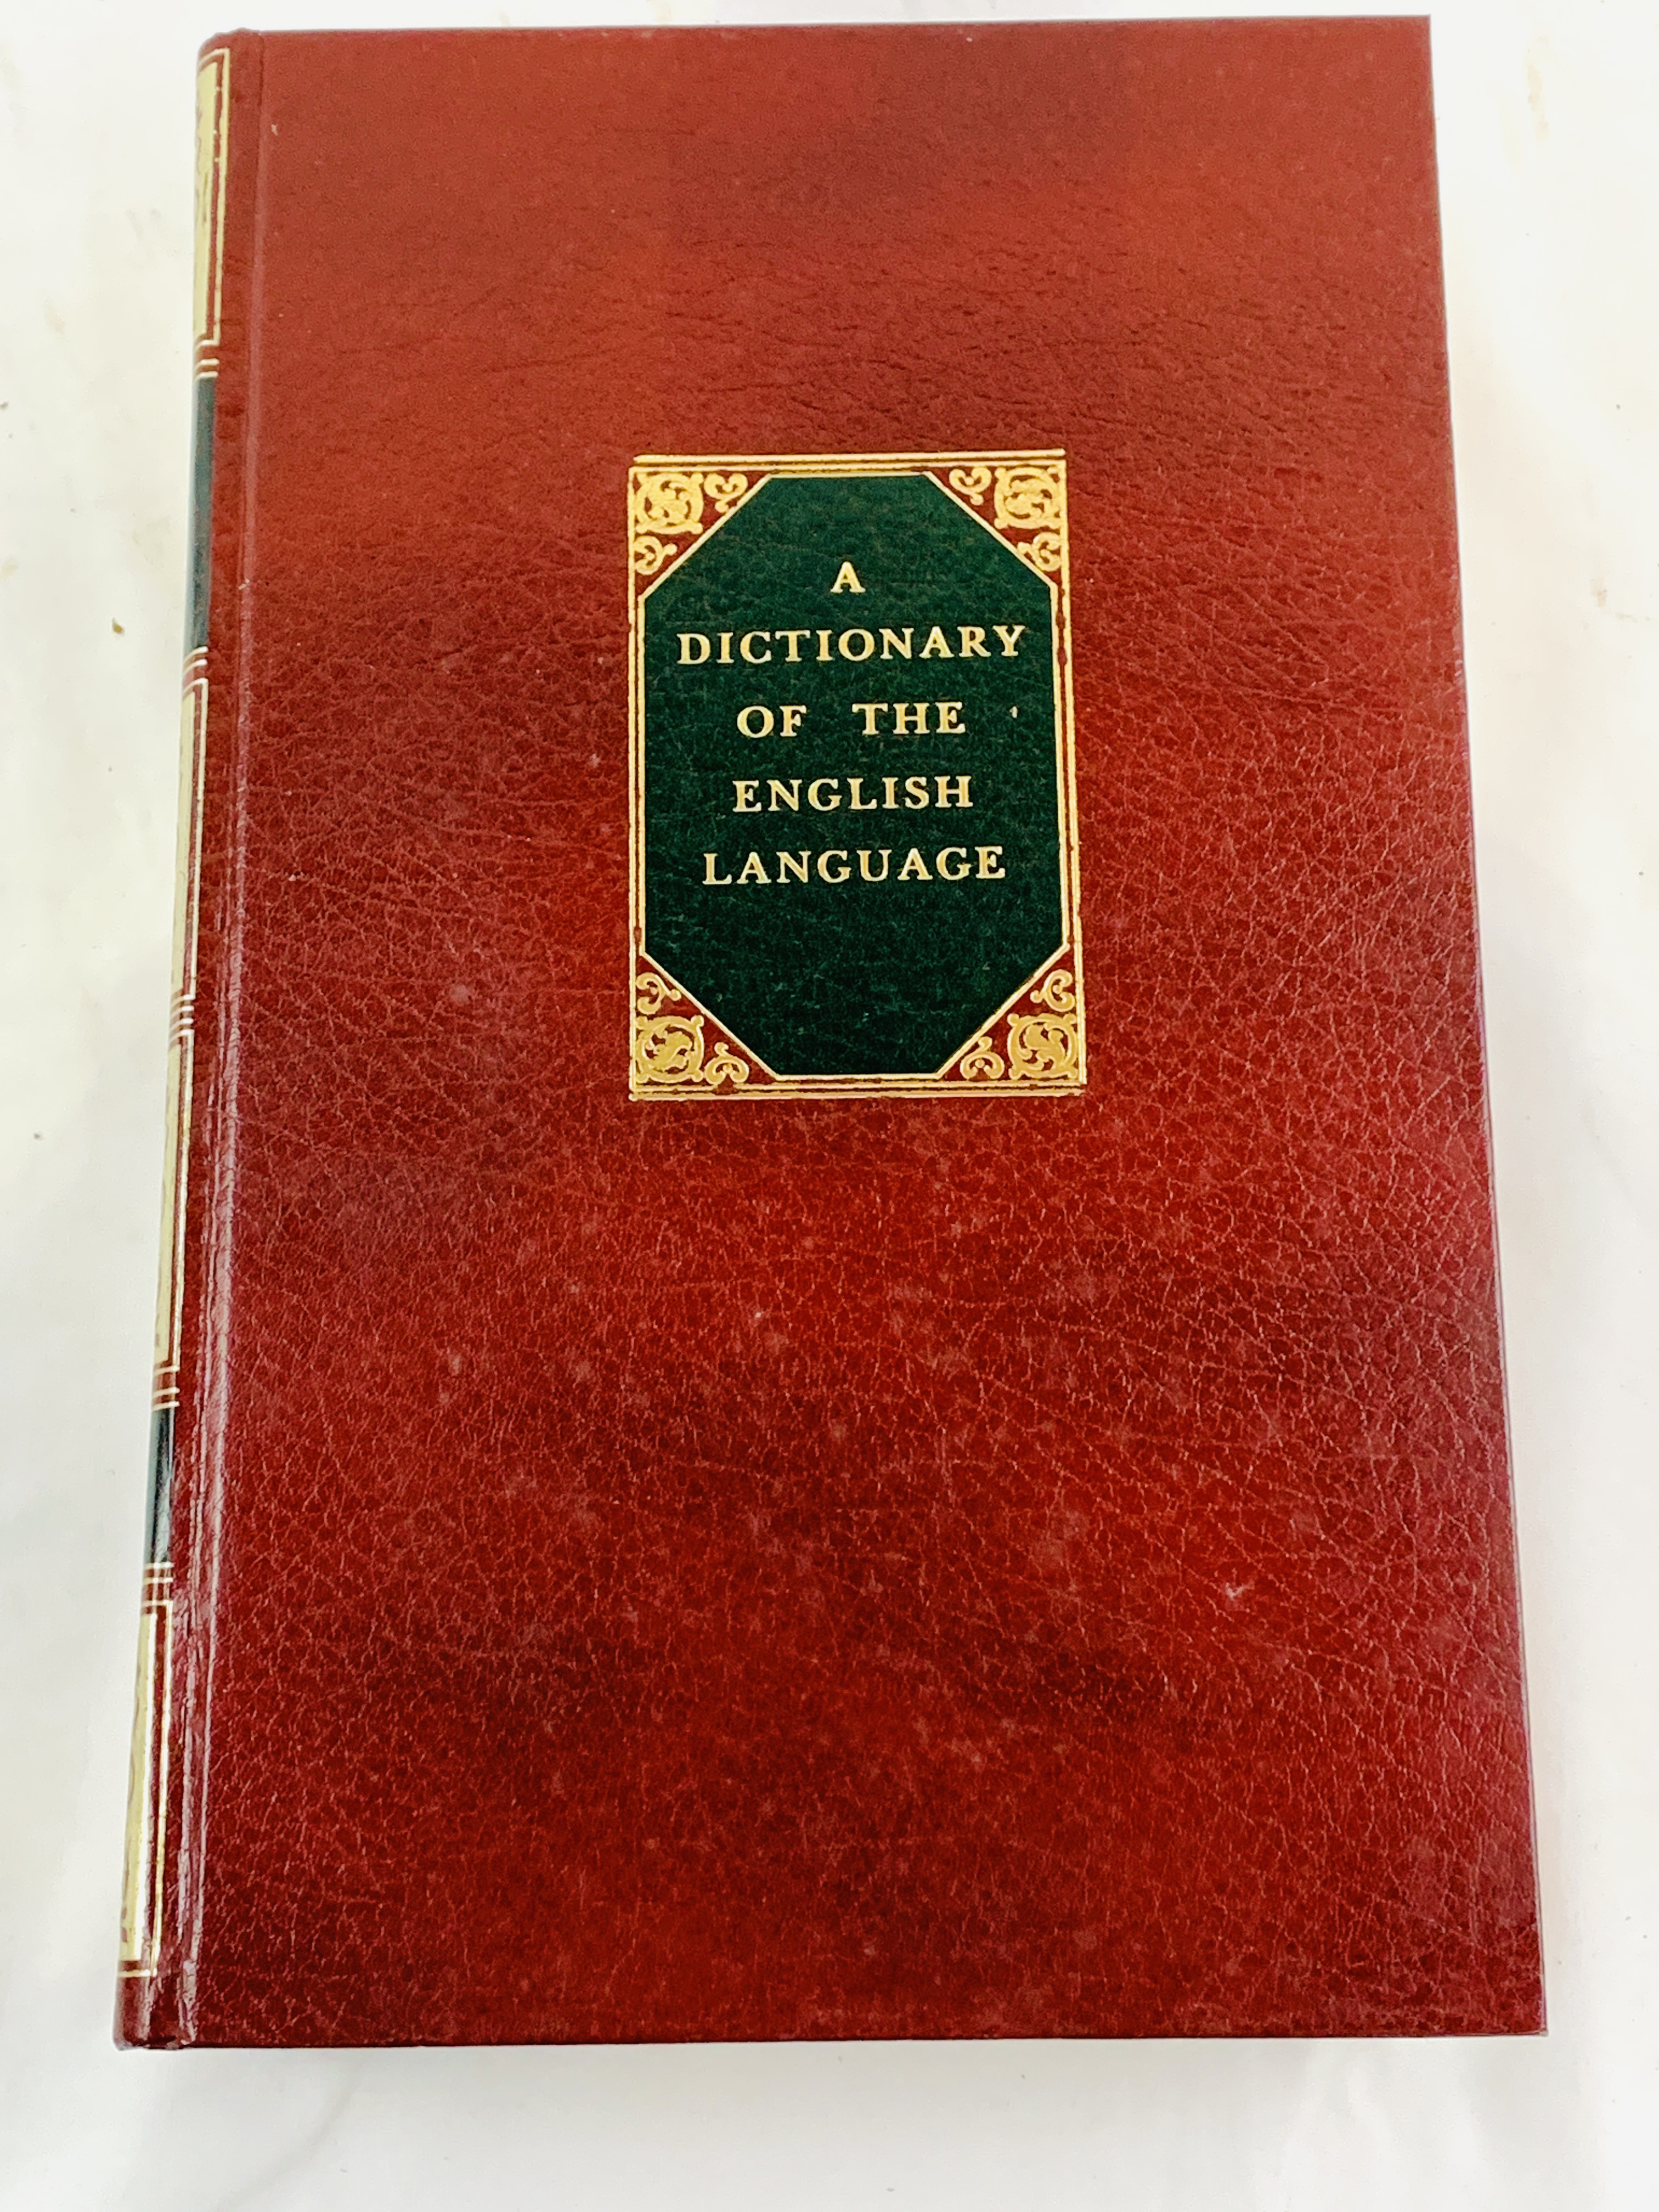 Dictionary of the English Language by Samuel Johnson by Times Books 1979